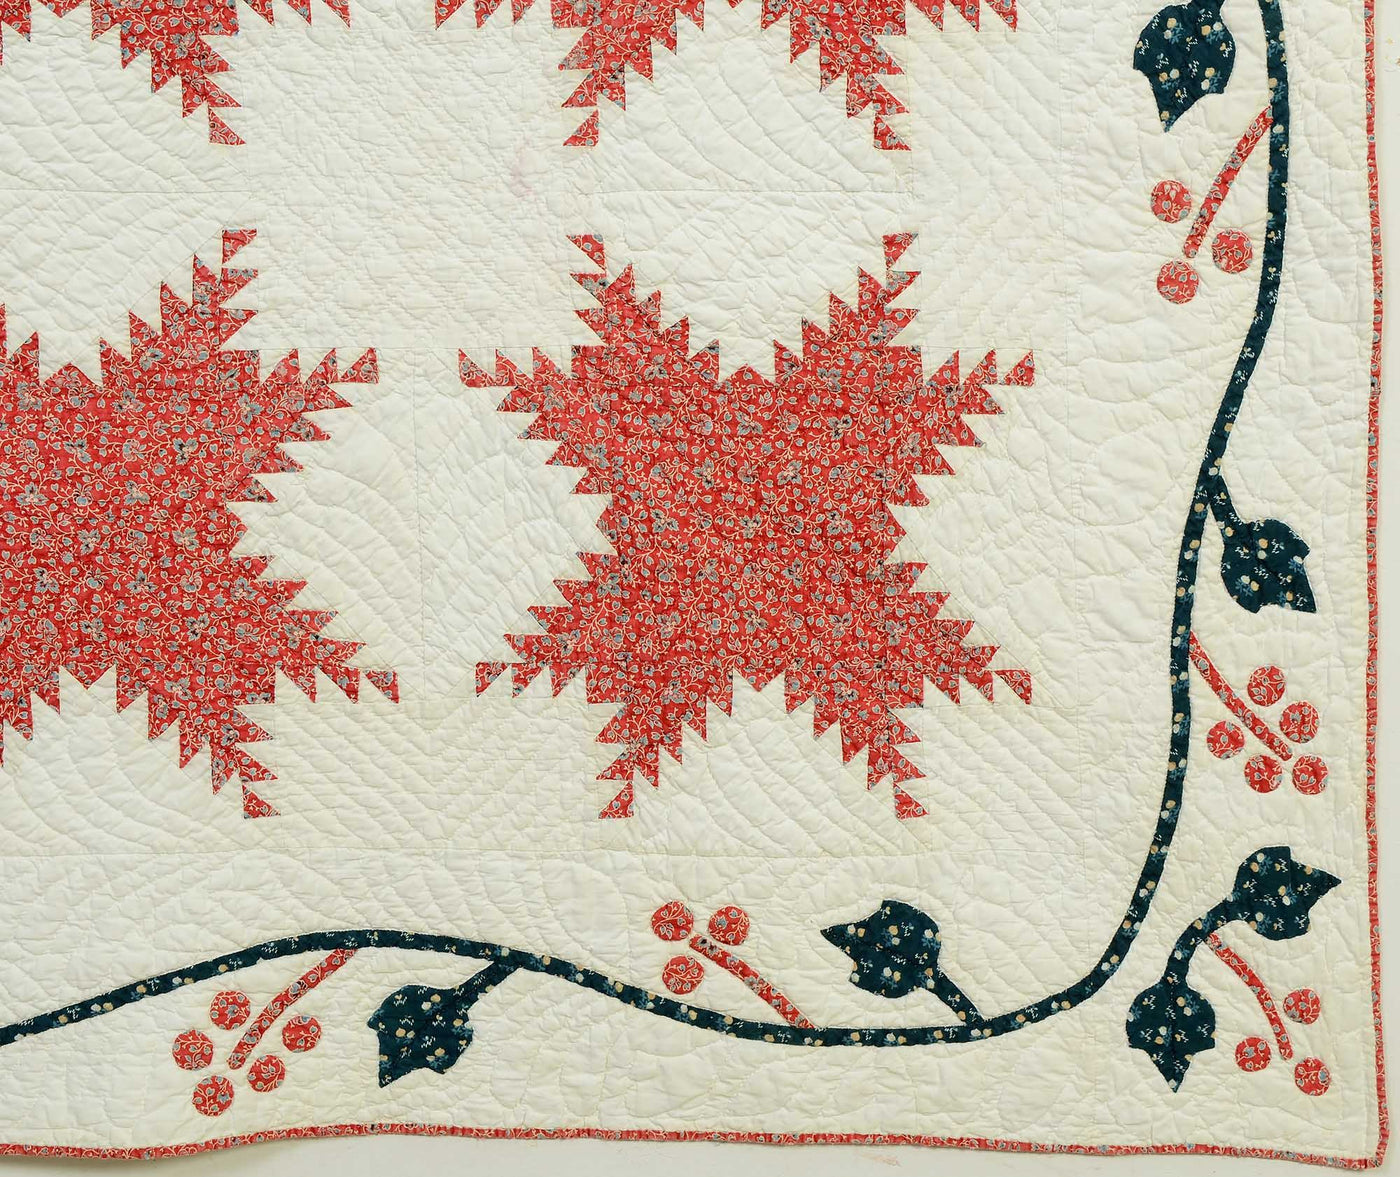 feathered-stars-quilt-with-applique-1405263-bottom-right-corner-detail-6